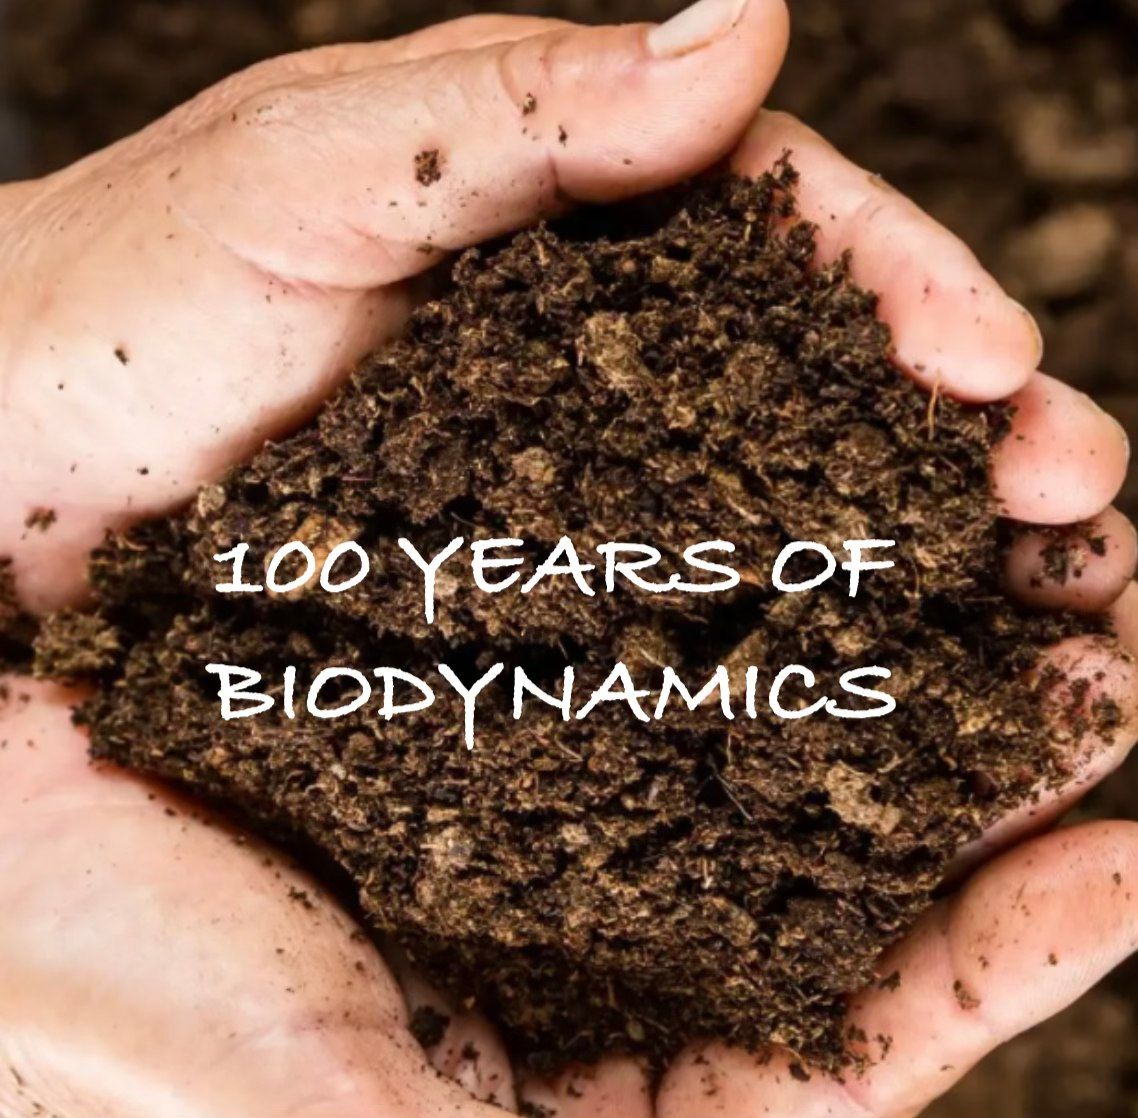 A Series of Events in Tasmania to Recognise the Centenary of Biodynamics